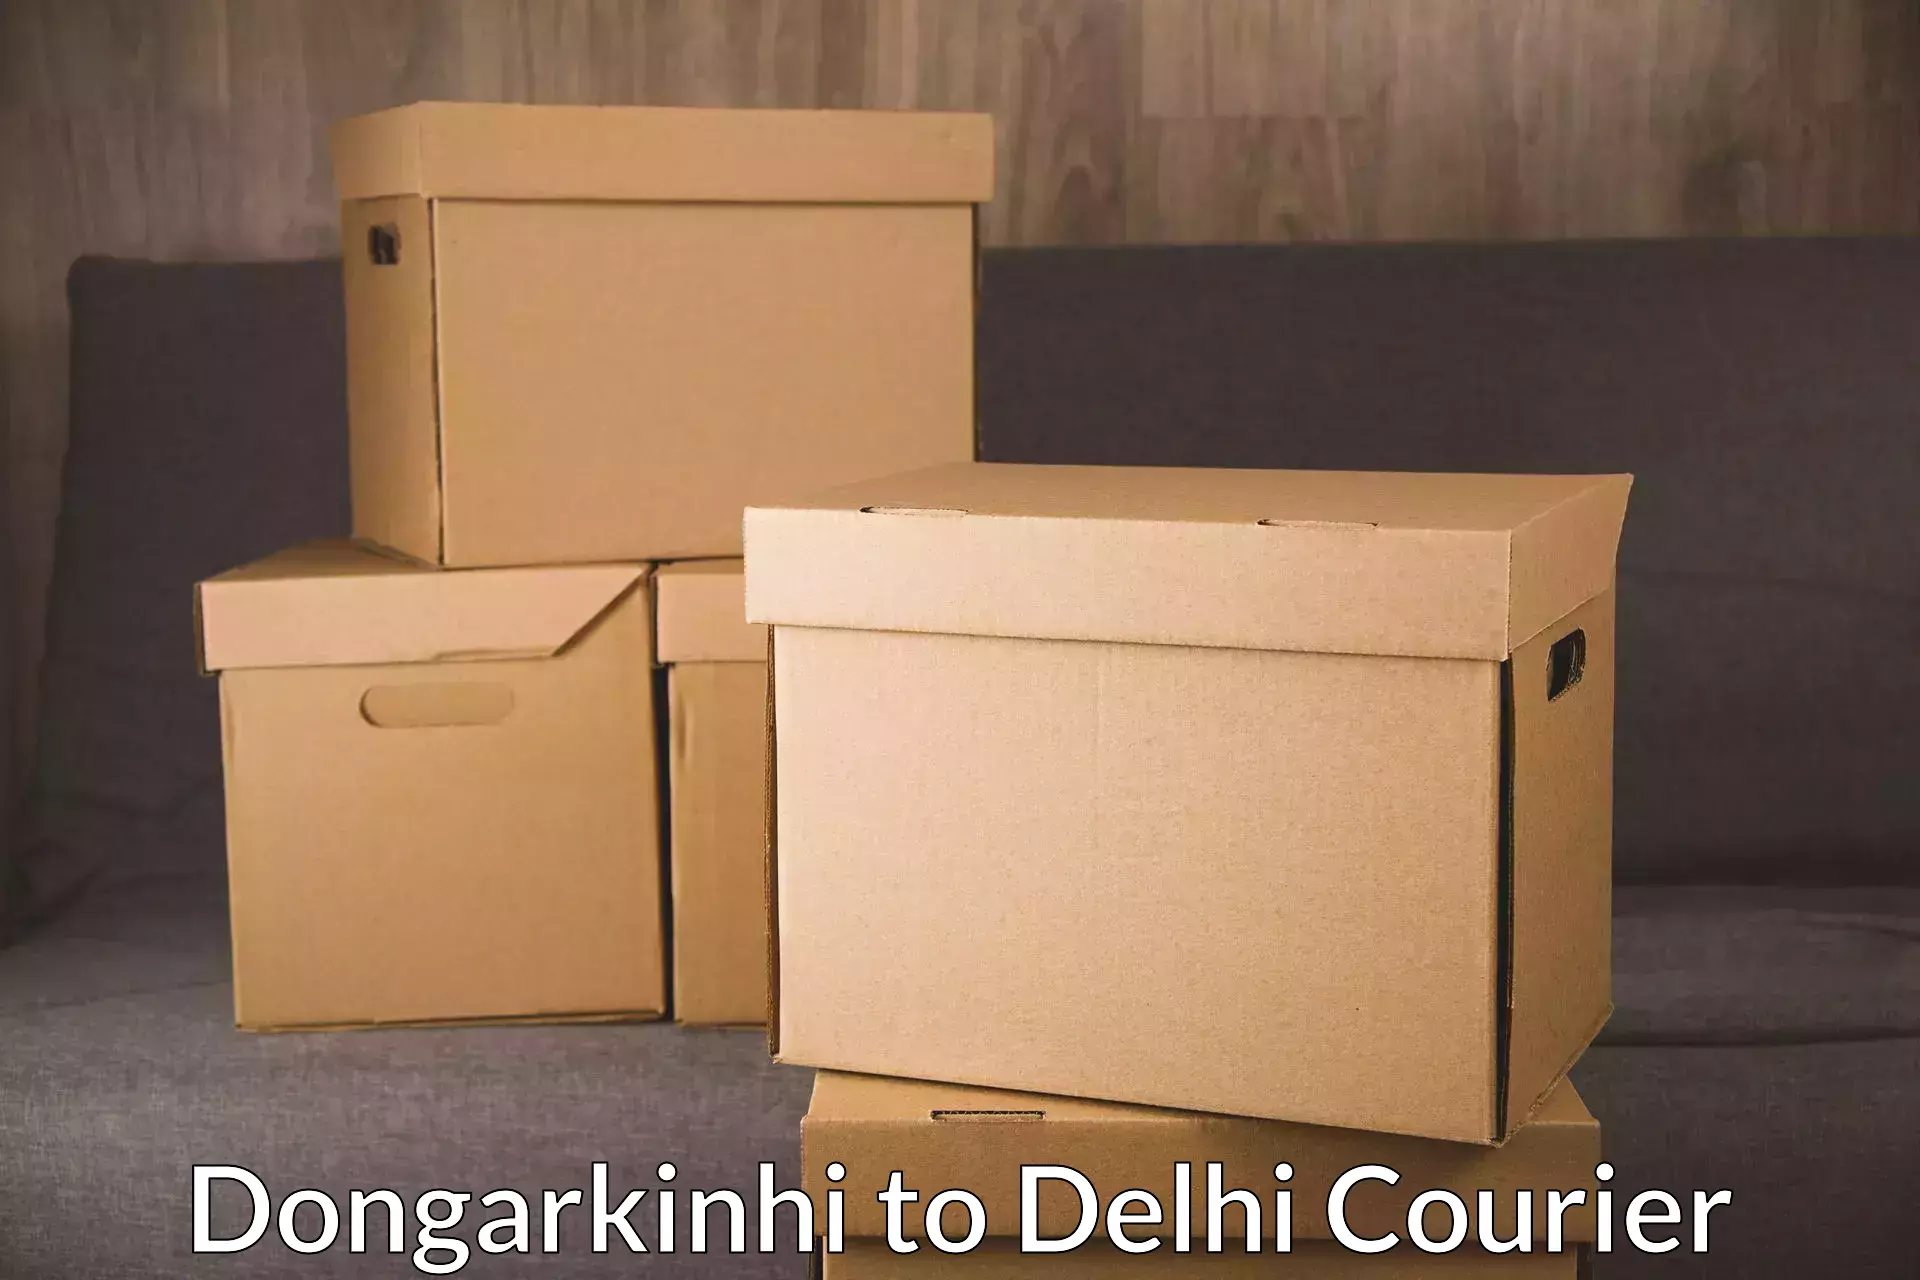 Personal courier services Dongarkinhi to University of Delhi